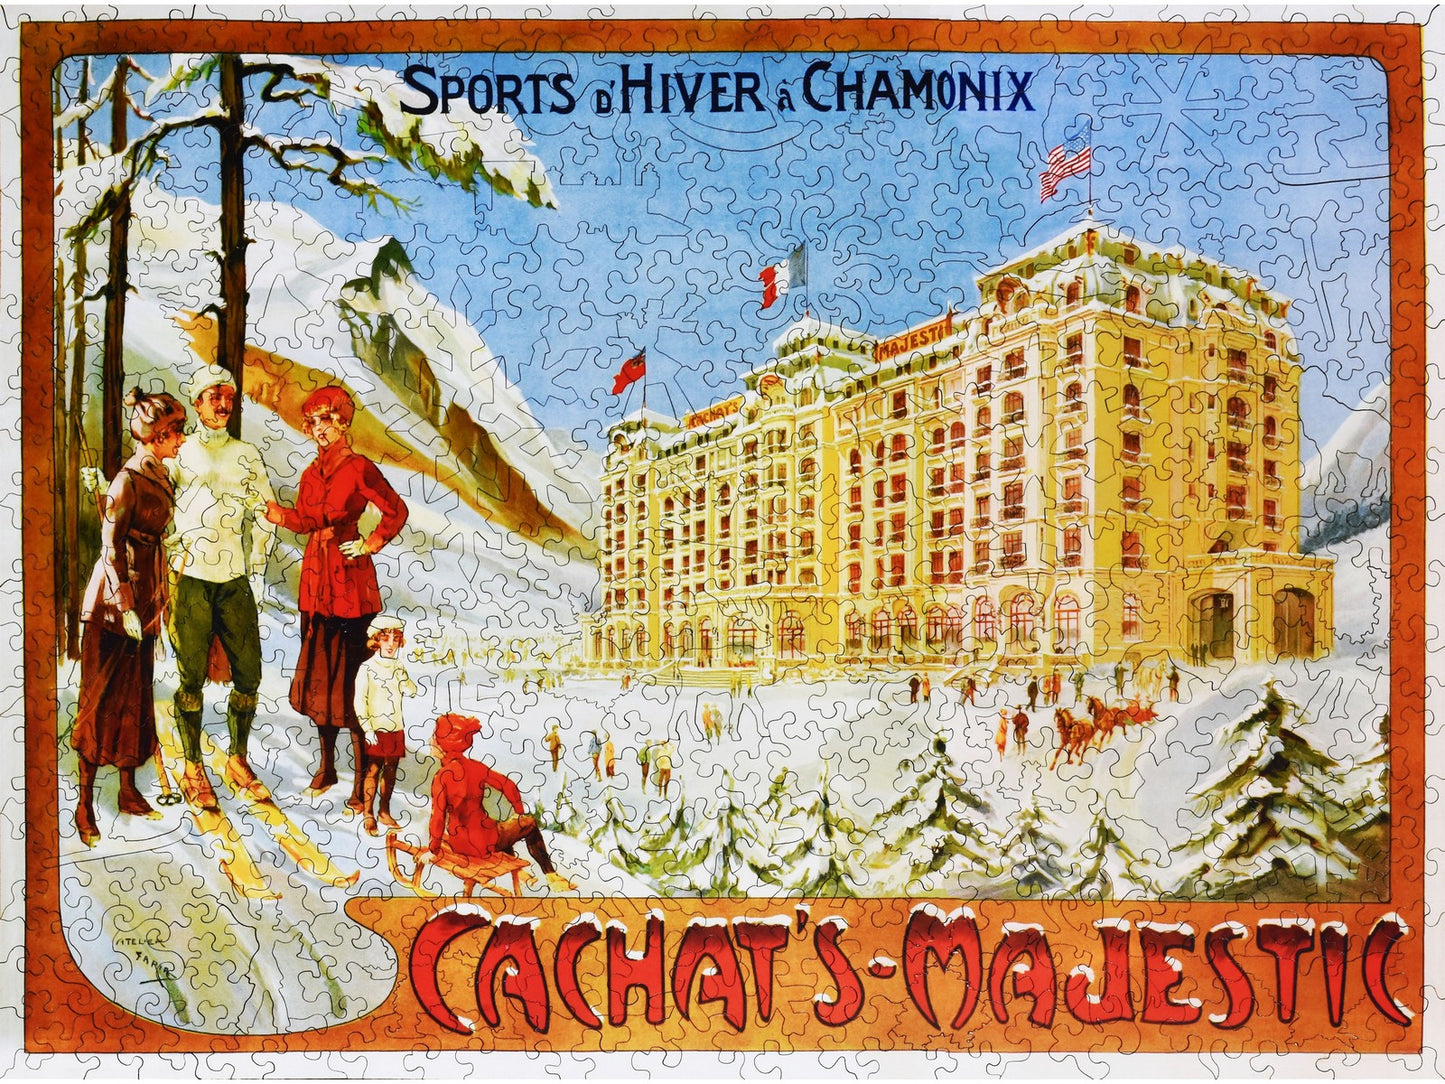 The front of the puzzle, Cachats Majestic Chamonix, which shows a ski resort in the mountains.